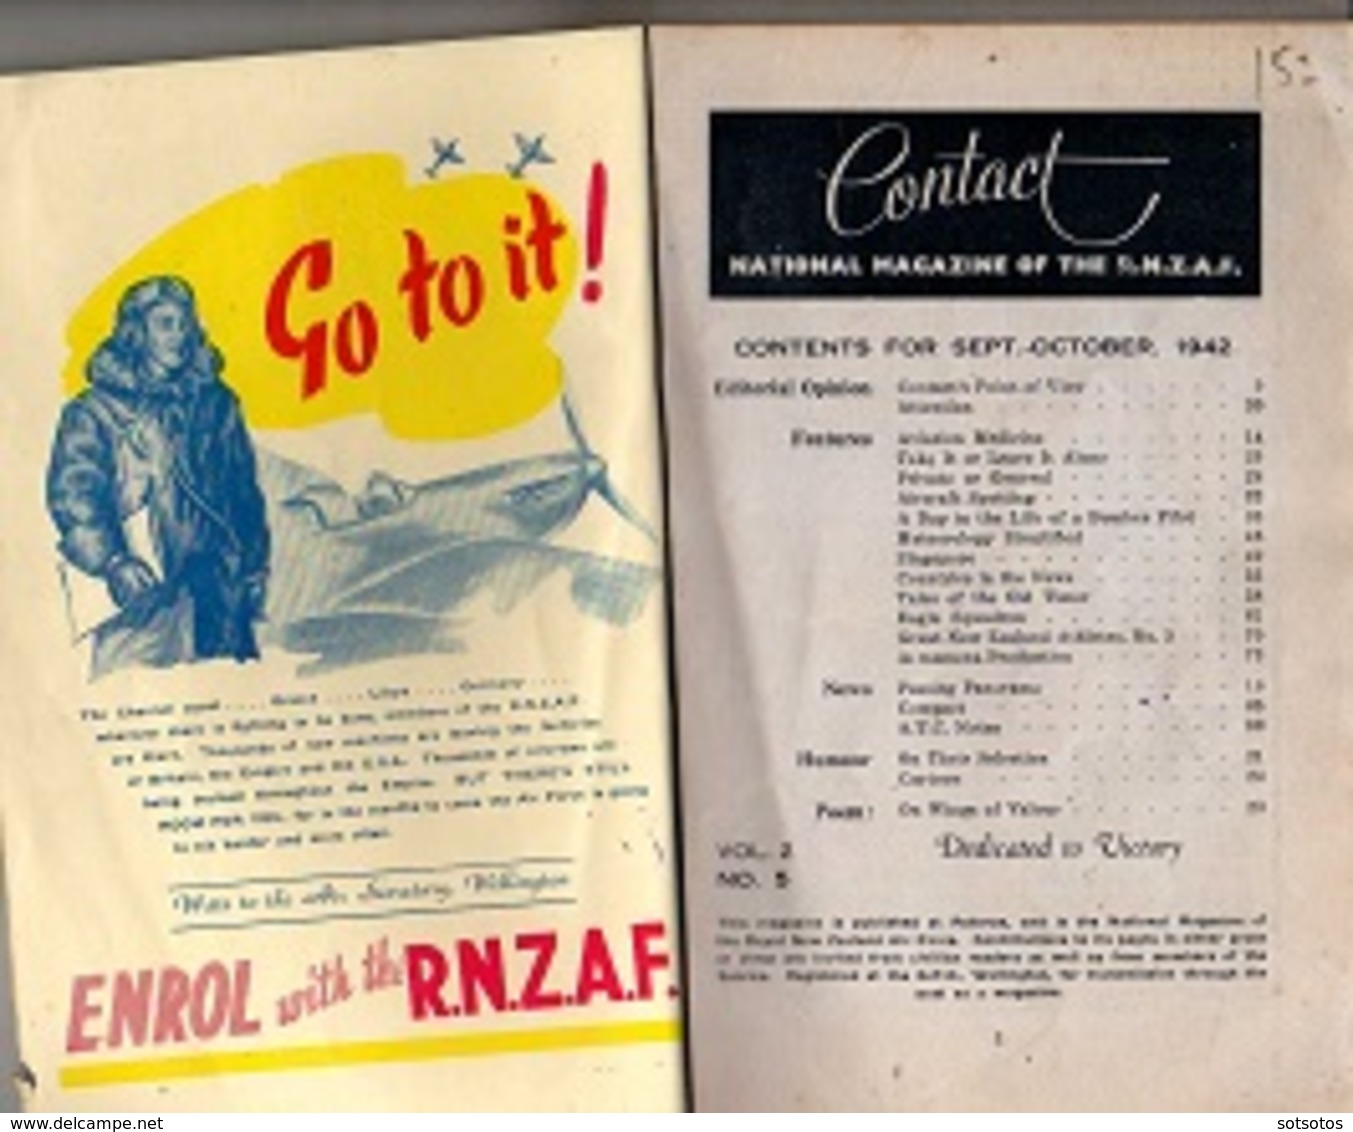 Contact Sept/Oct  1942: NATIONAL MAGAZINE Of TheR.N.Z.A.F. (Royal New Zealend Air Force) 84+4 Pages Plenty Of Pictures - Military/ War